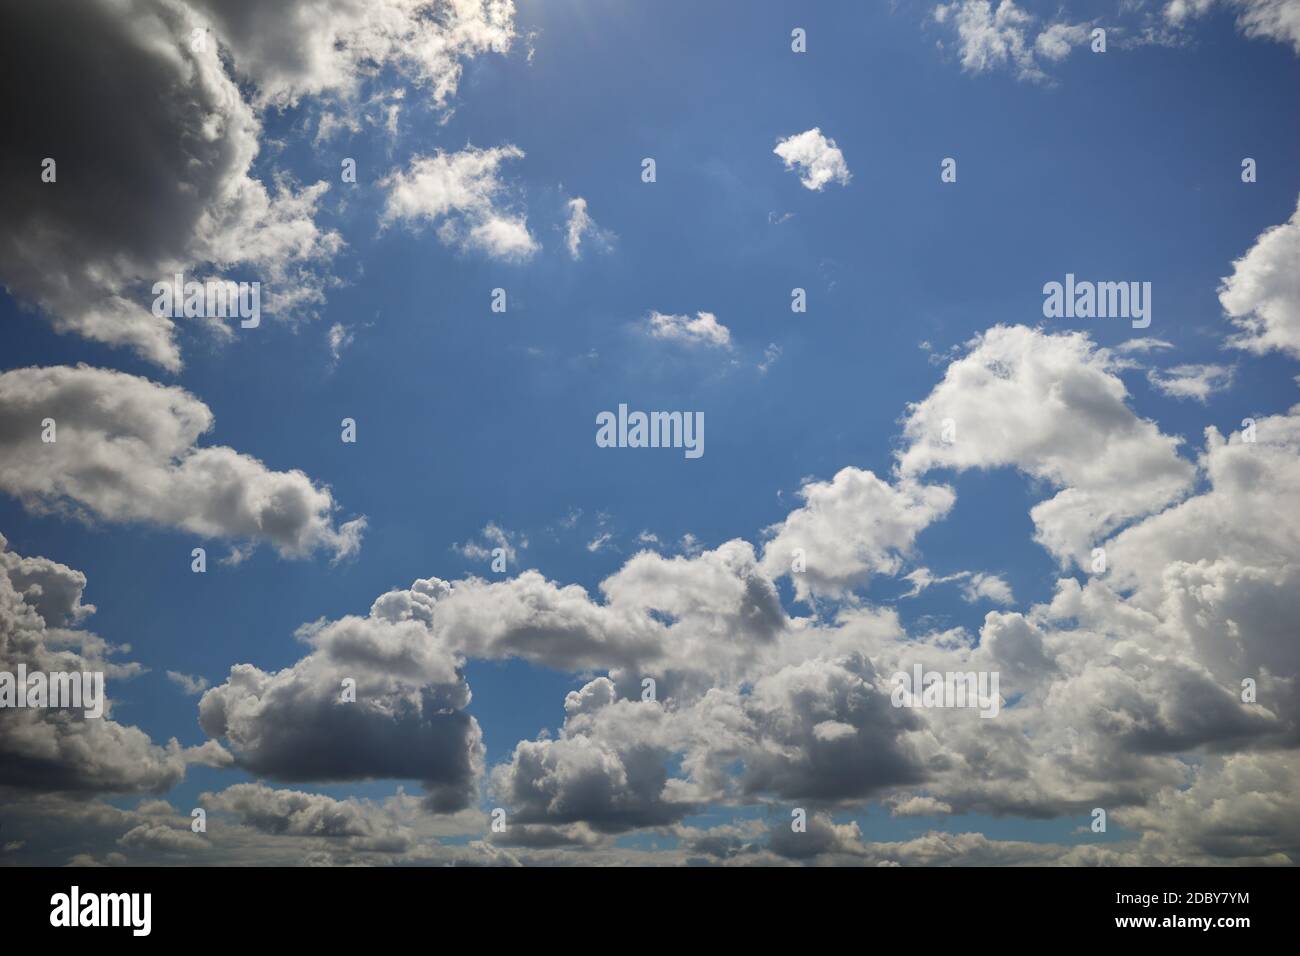 Cumulus clouds in blue sky lightened by sunrays Stock Photo